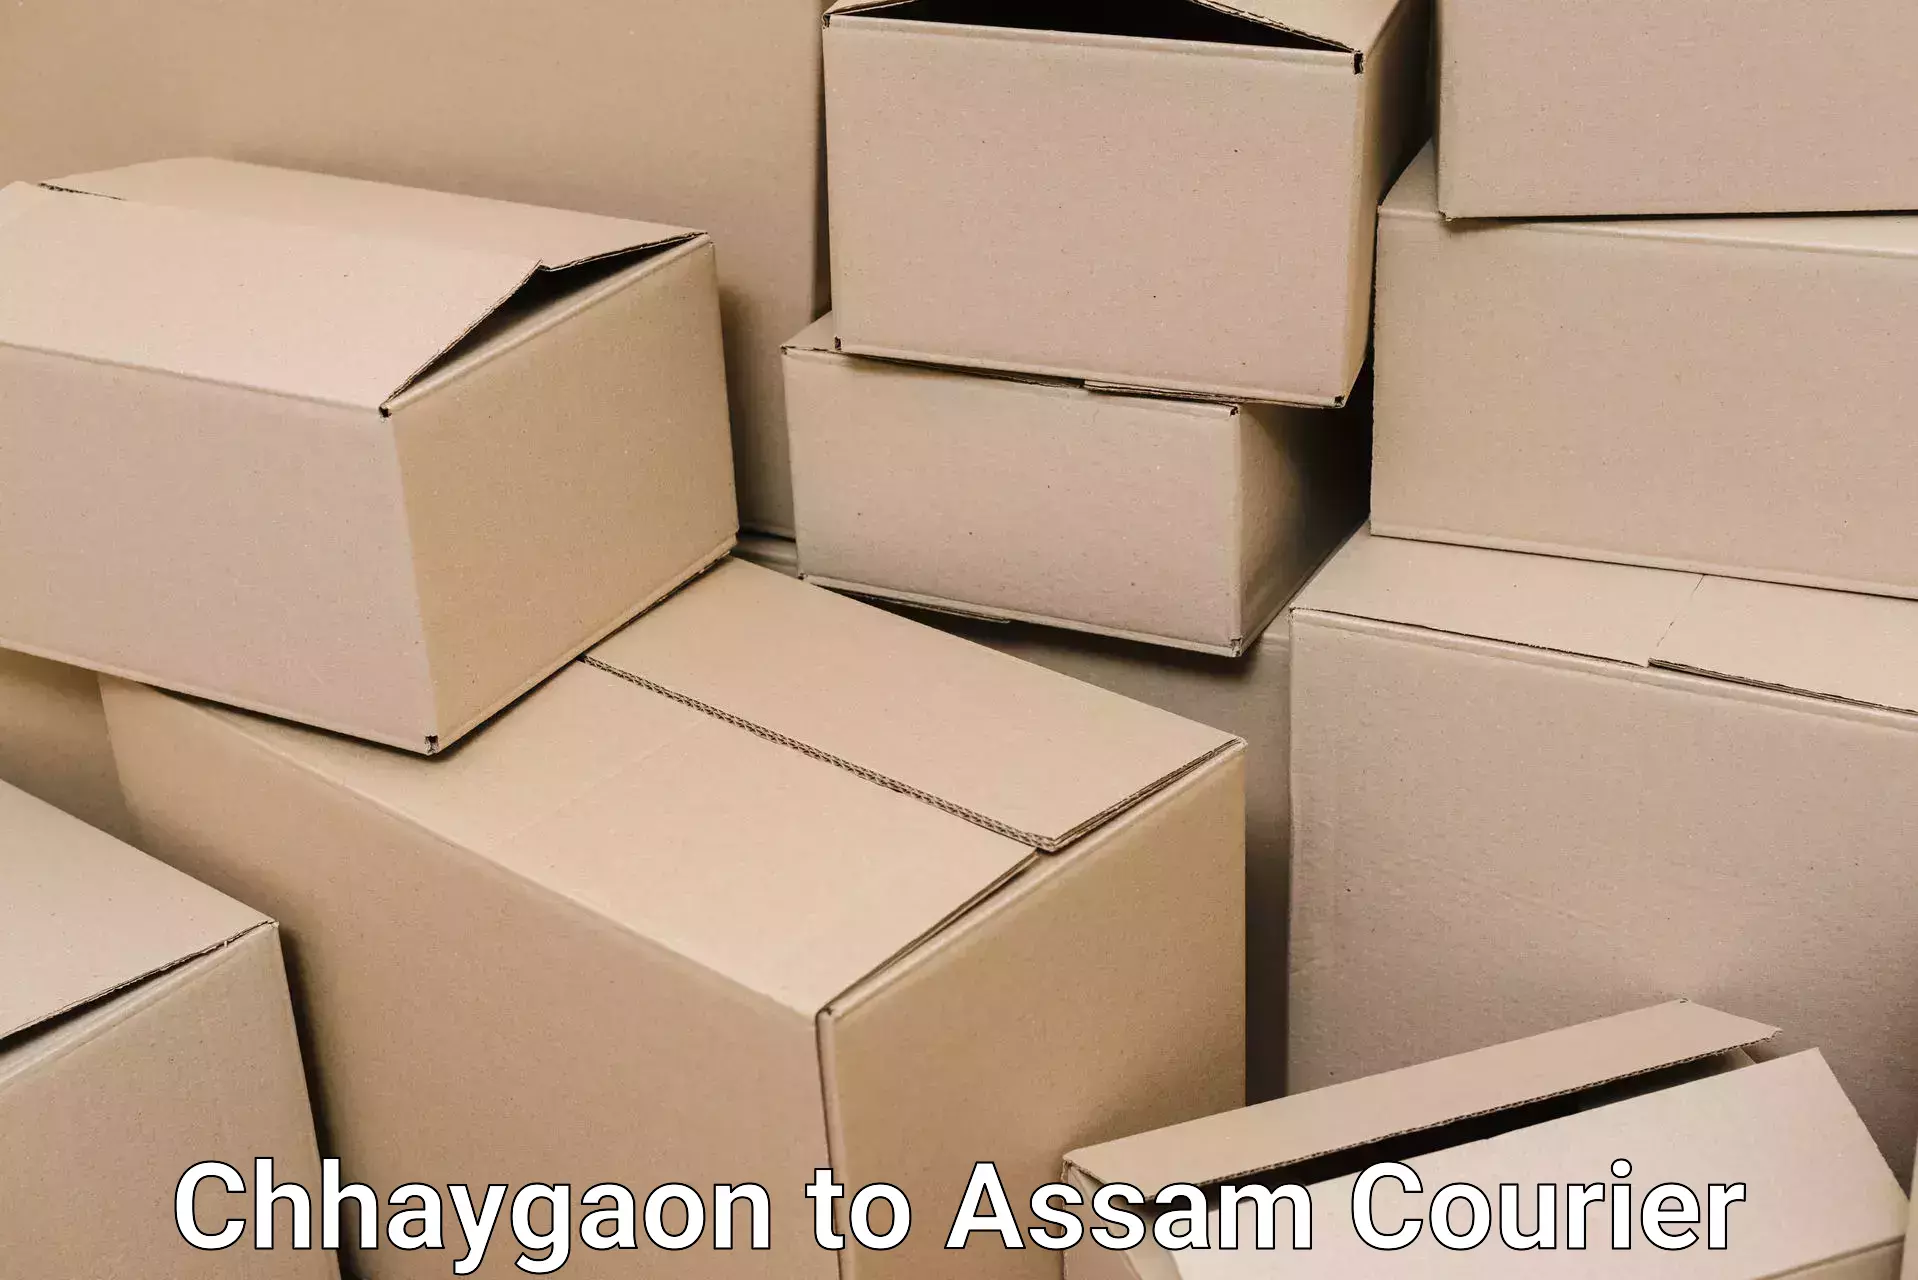 Reliable moving assistance Chhaygaon to Amoni